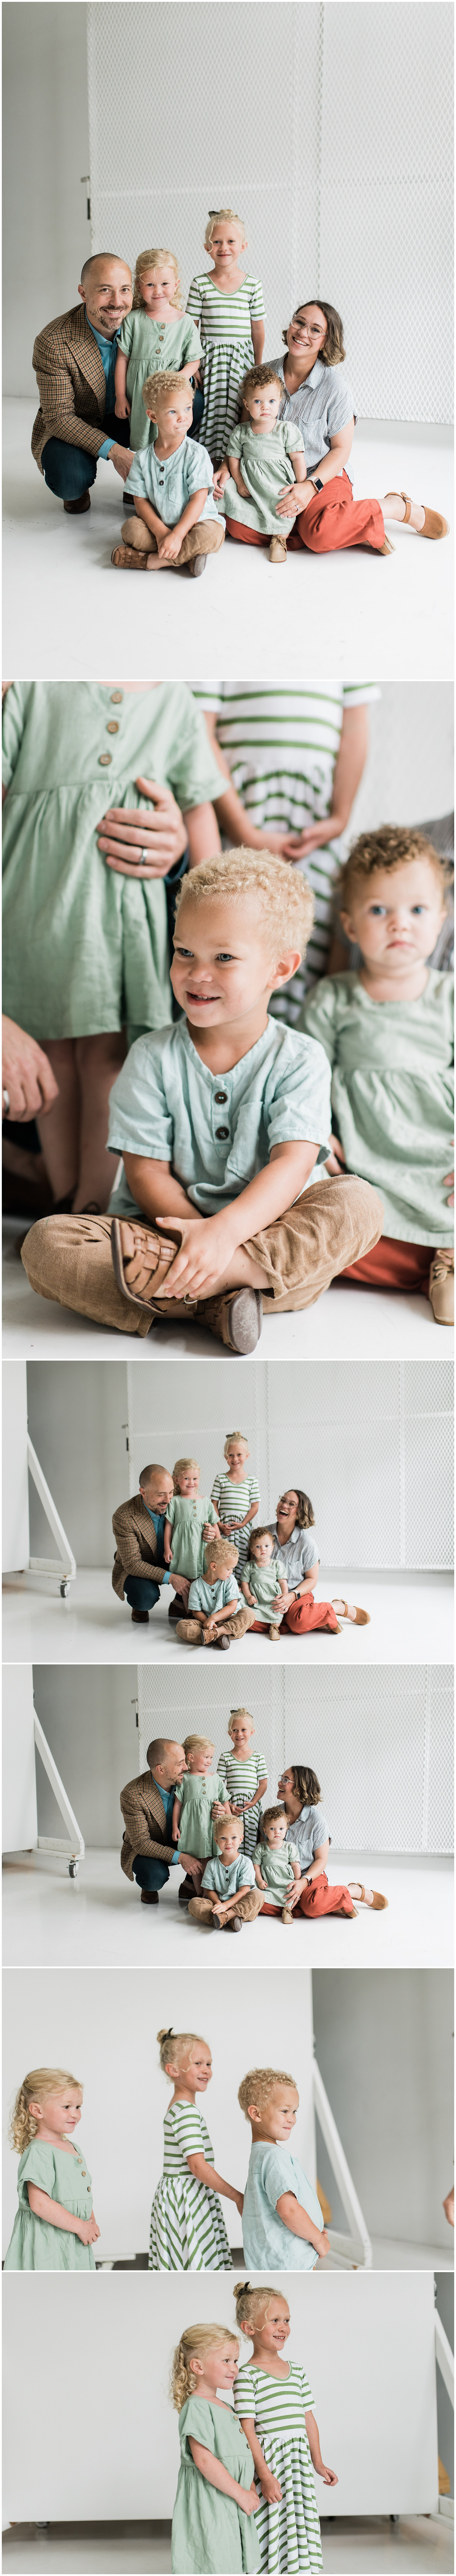  The Darkroom Fort Worth, Family session | Fort Worth Family Photographer | www.jordanmitchellphotography.com 